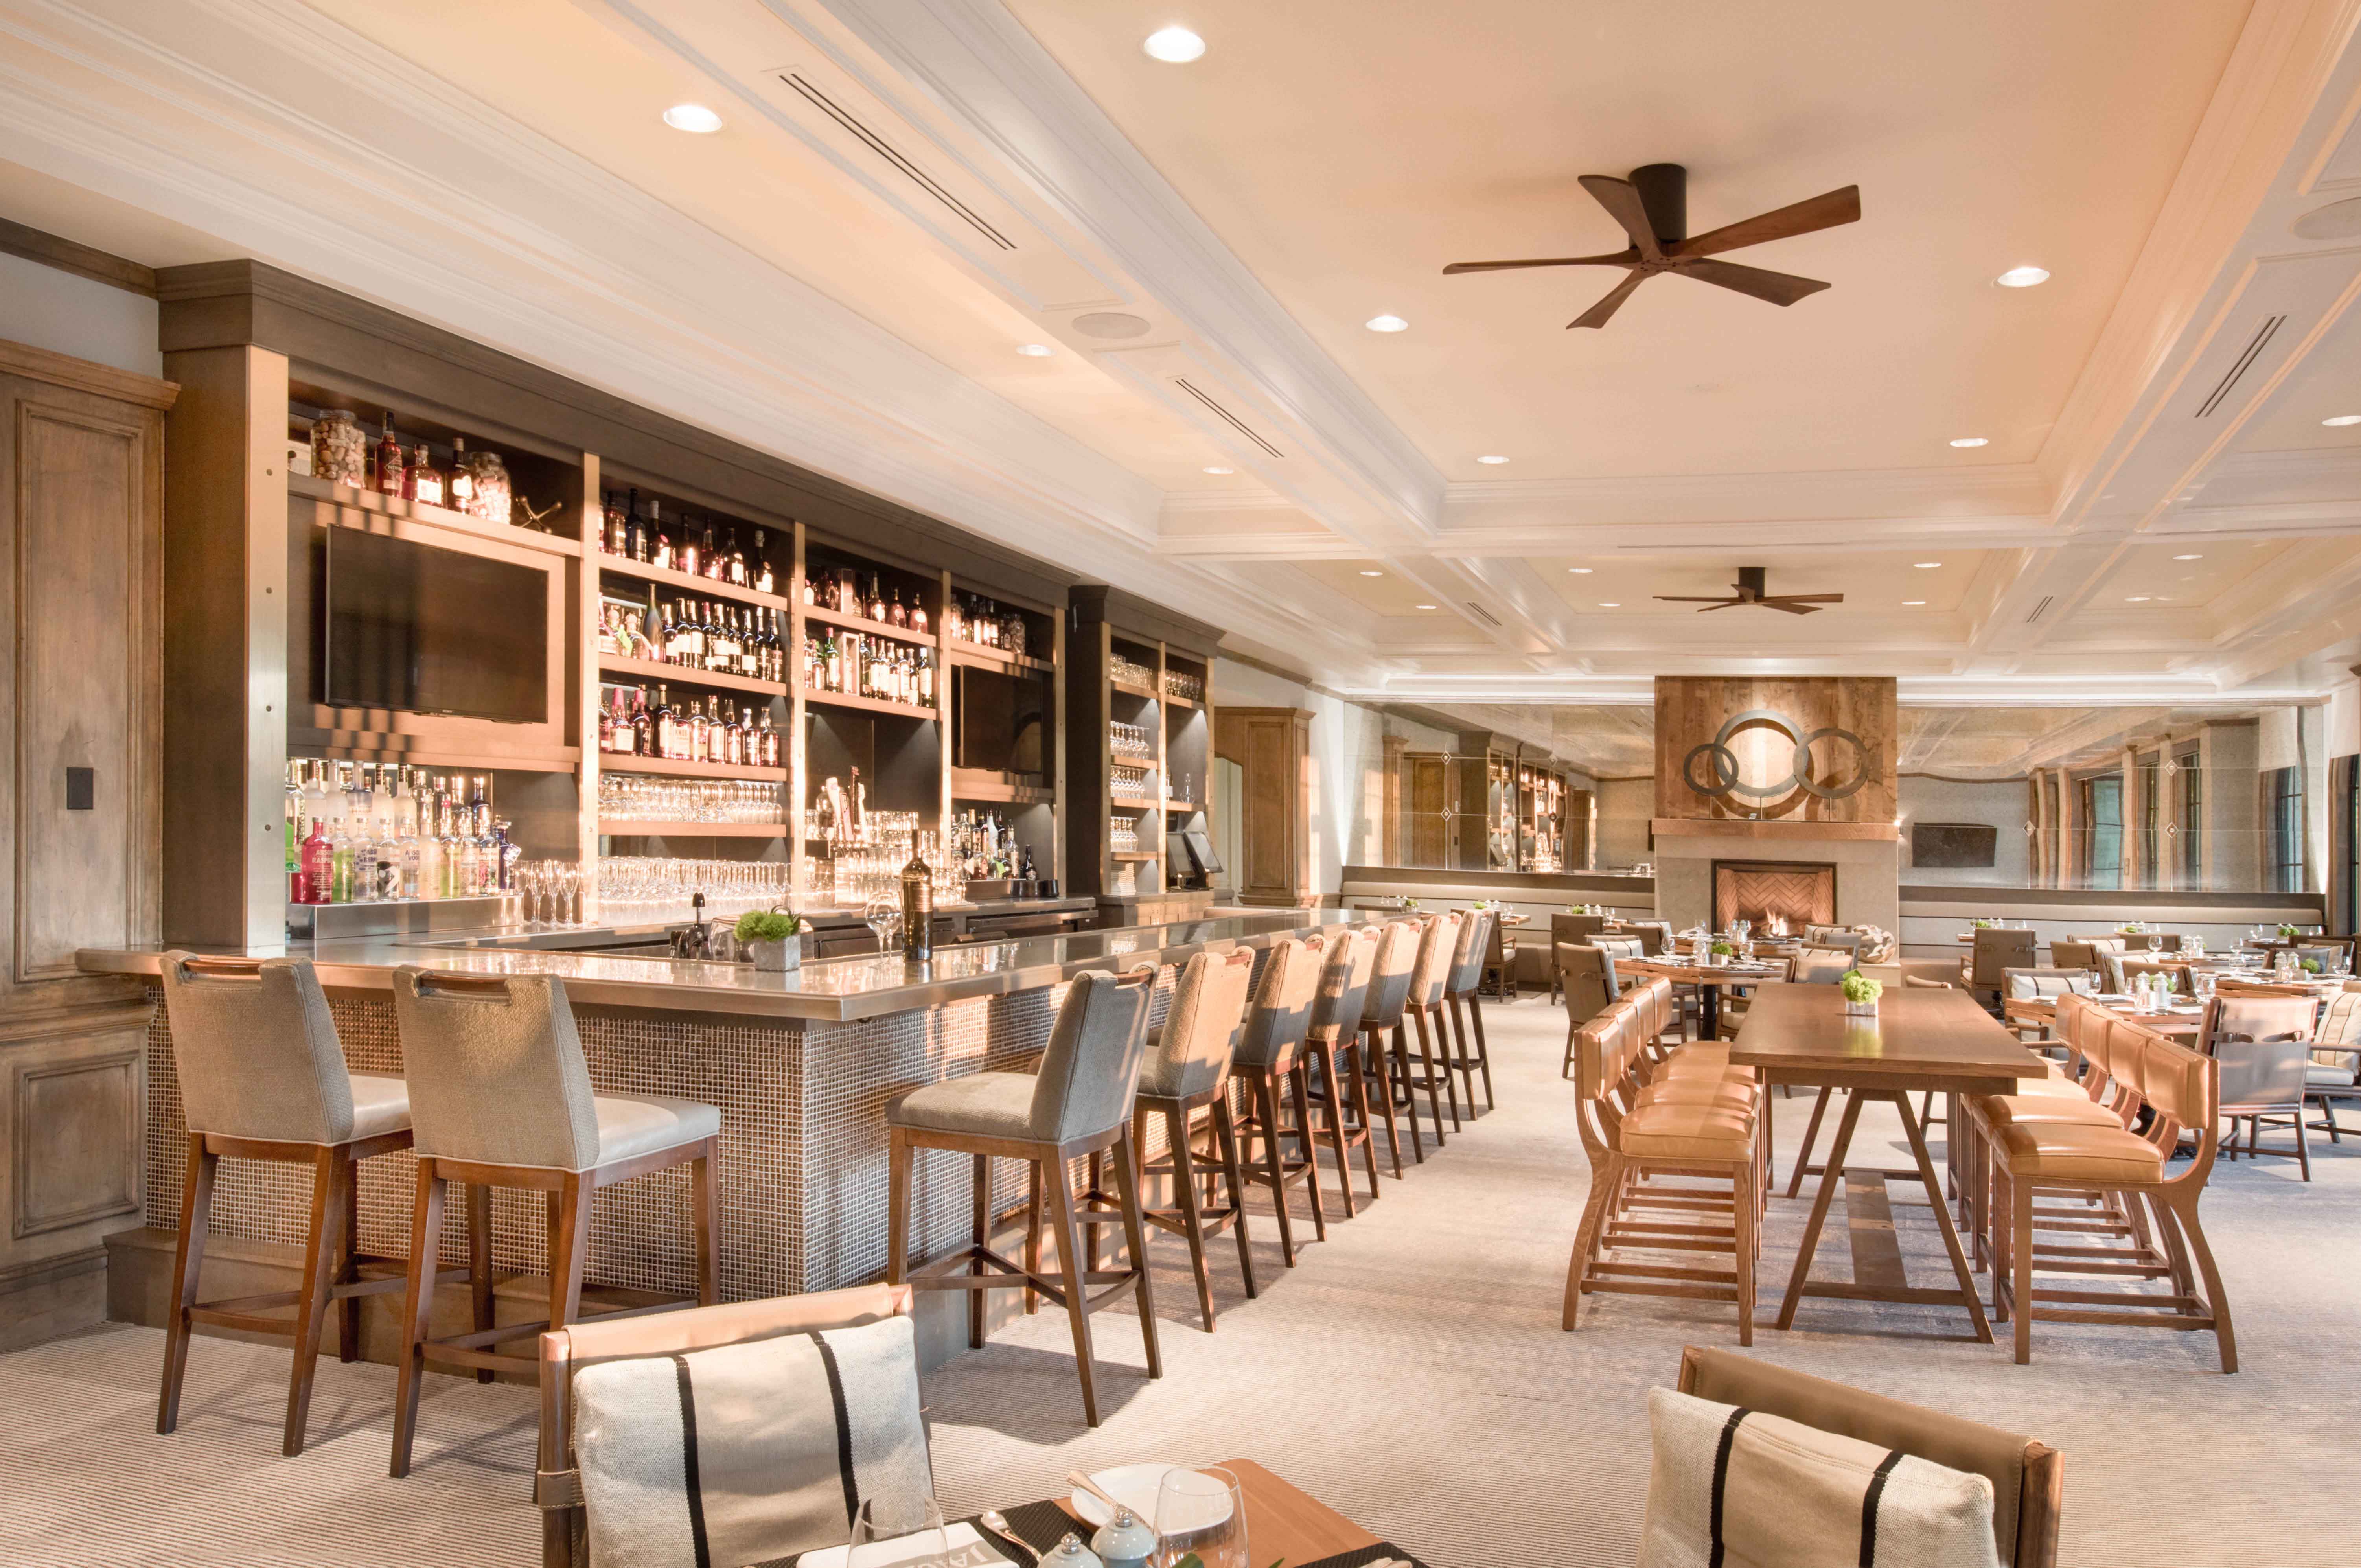 JOHNS ISLAND CLUB private club remodel by j banks design group in light oatmeal hues